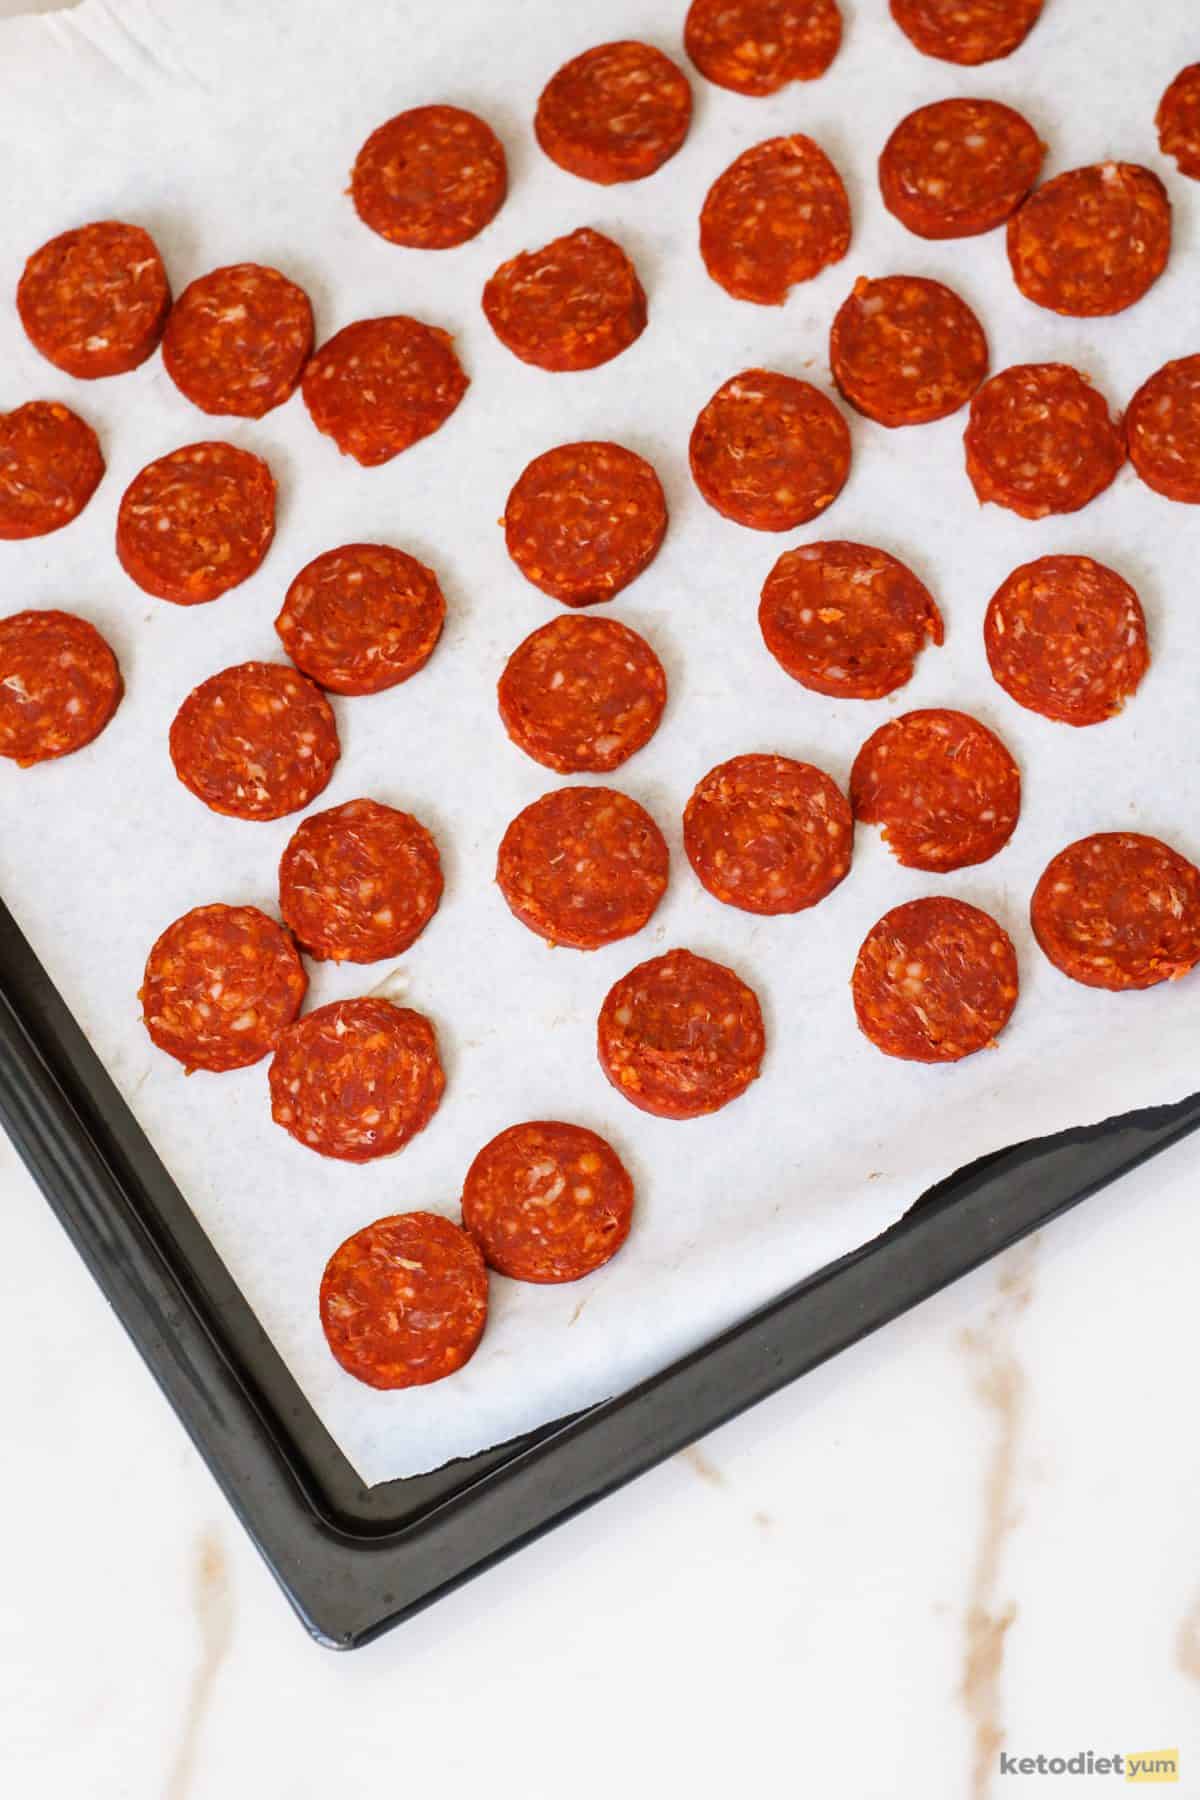 Sliced chorizo chips on a baking pan lined with baking paper ready to bake in the oven